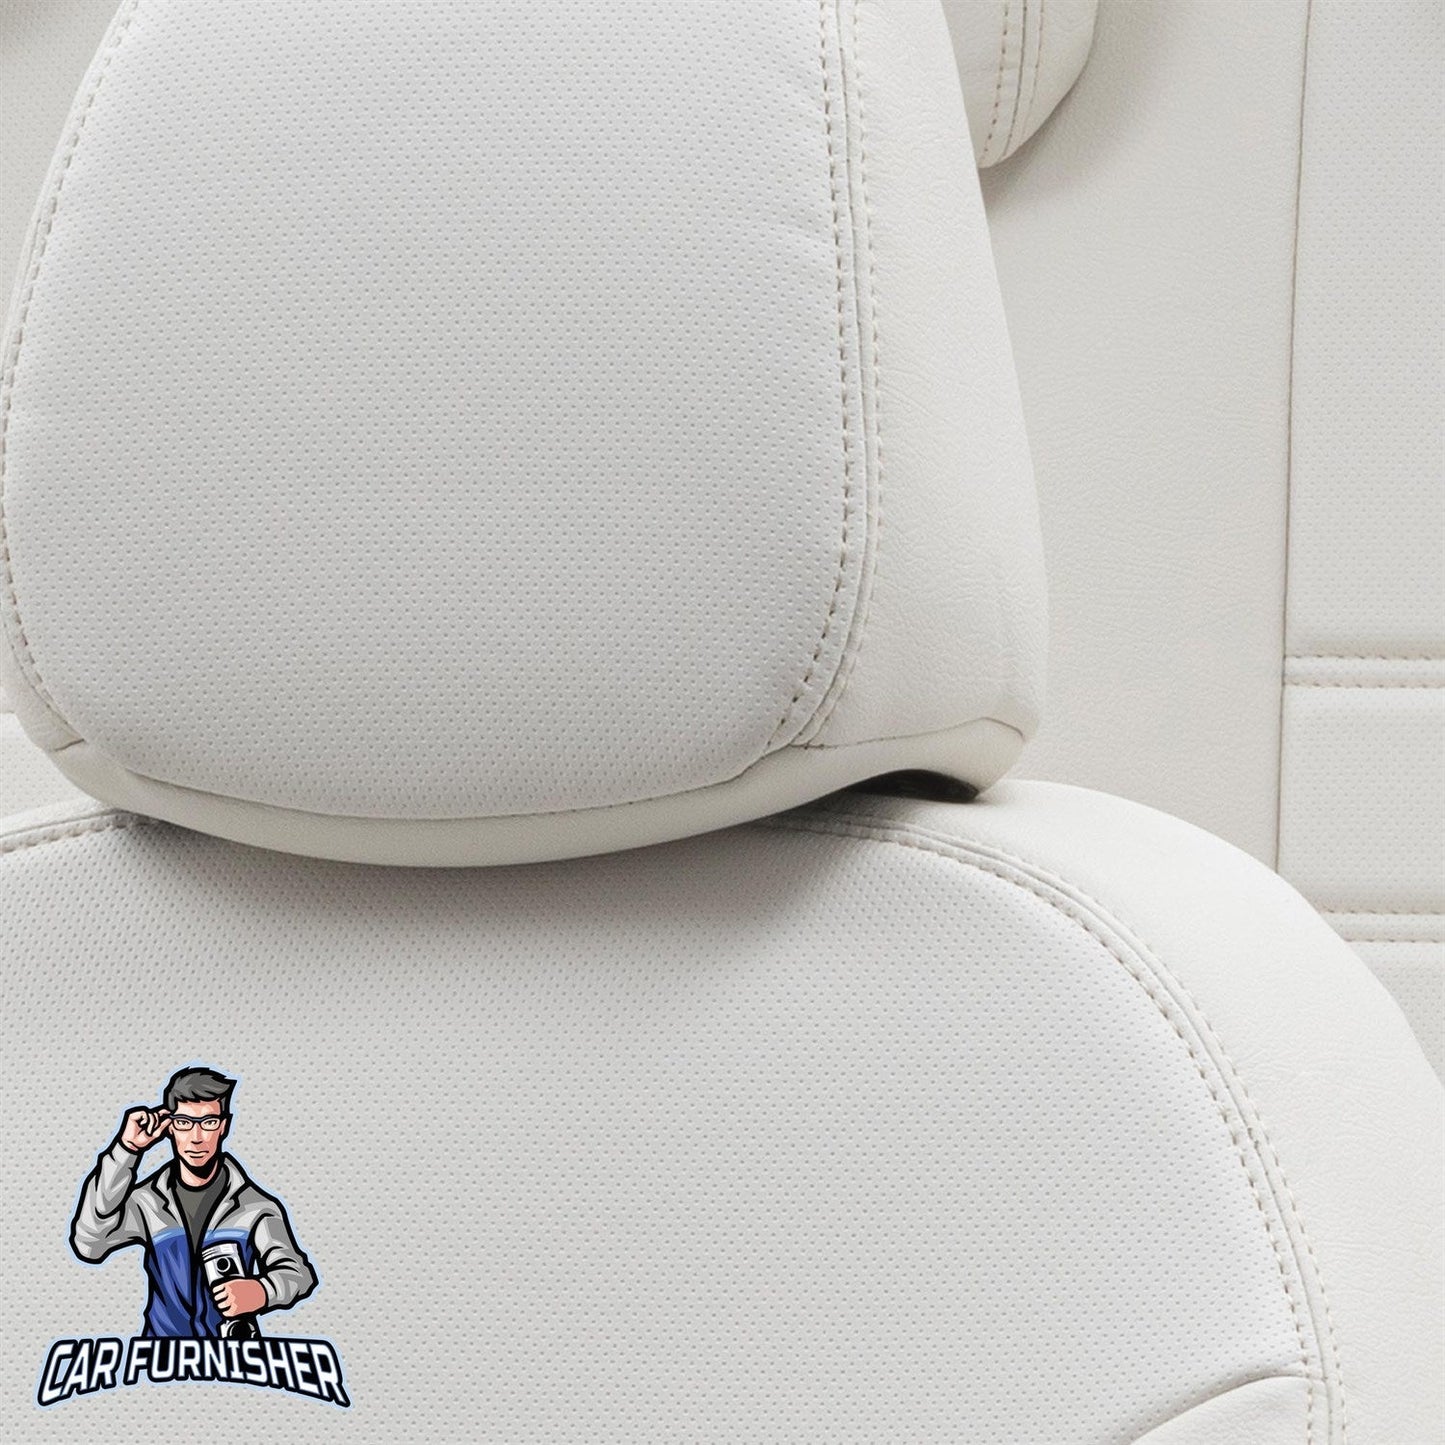 Tesla Model S Seat Cover Istanbul Leather Design Ivory Leather